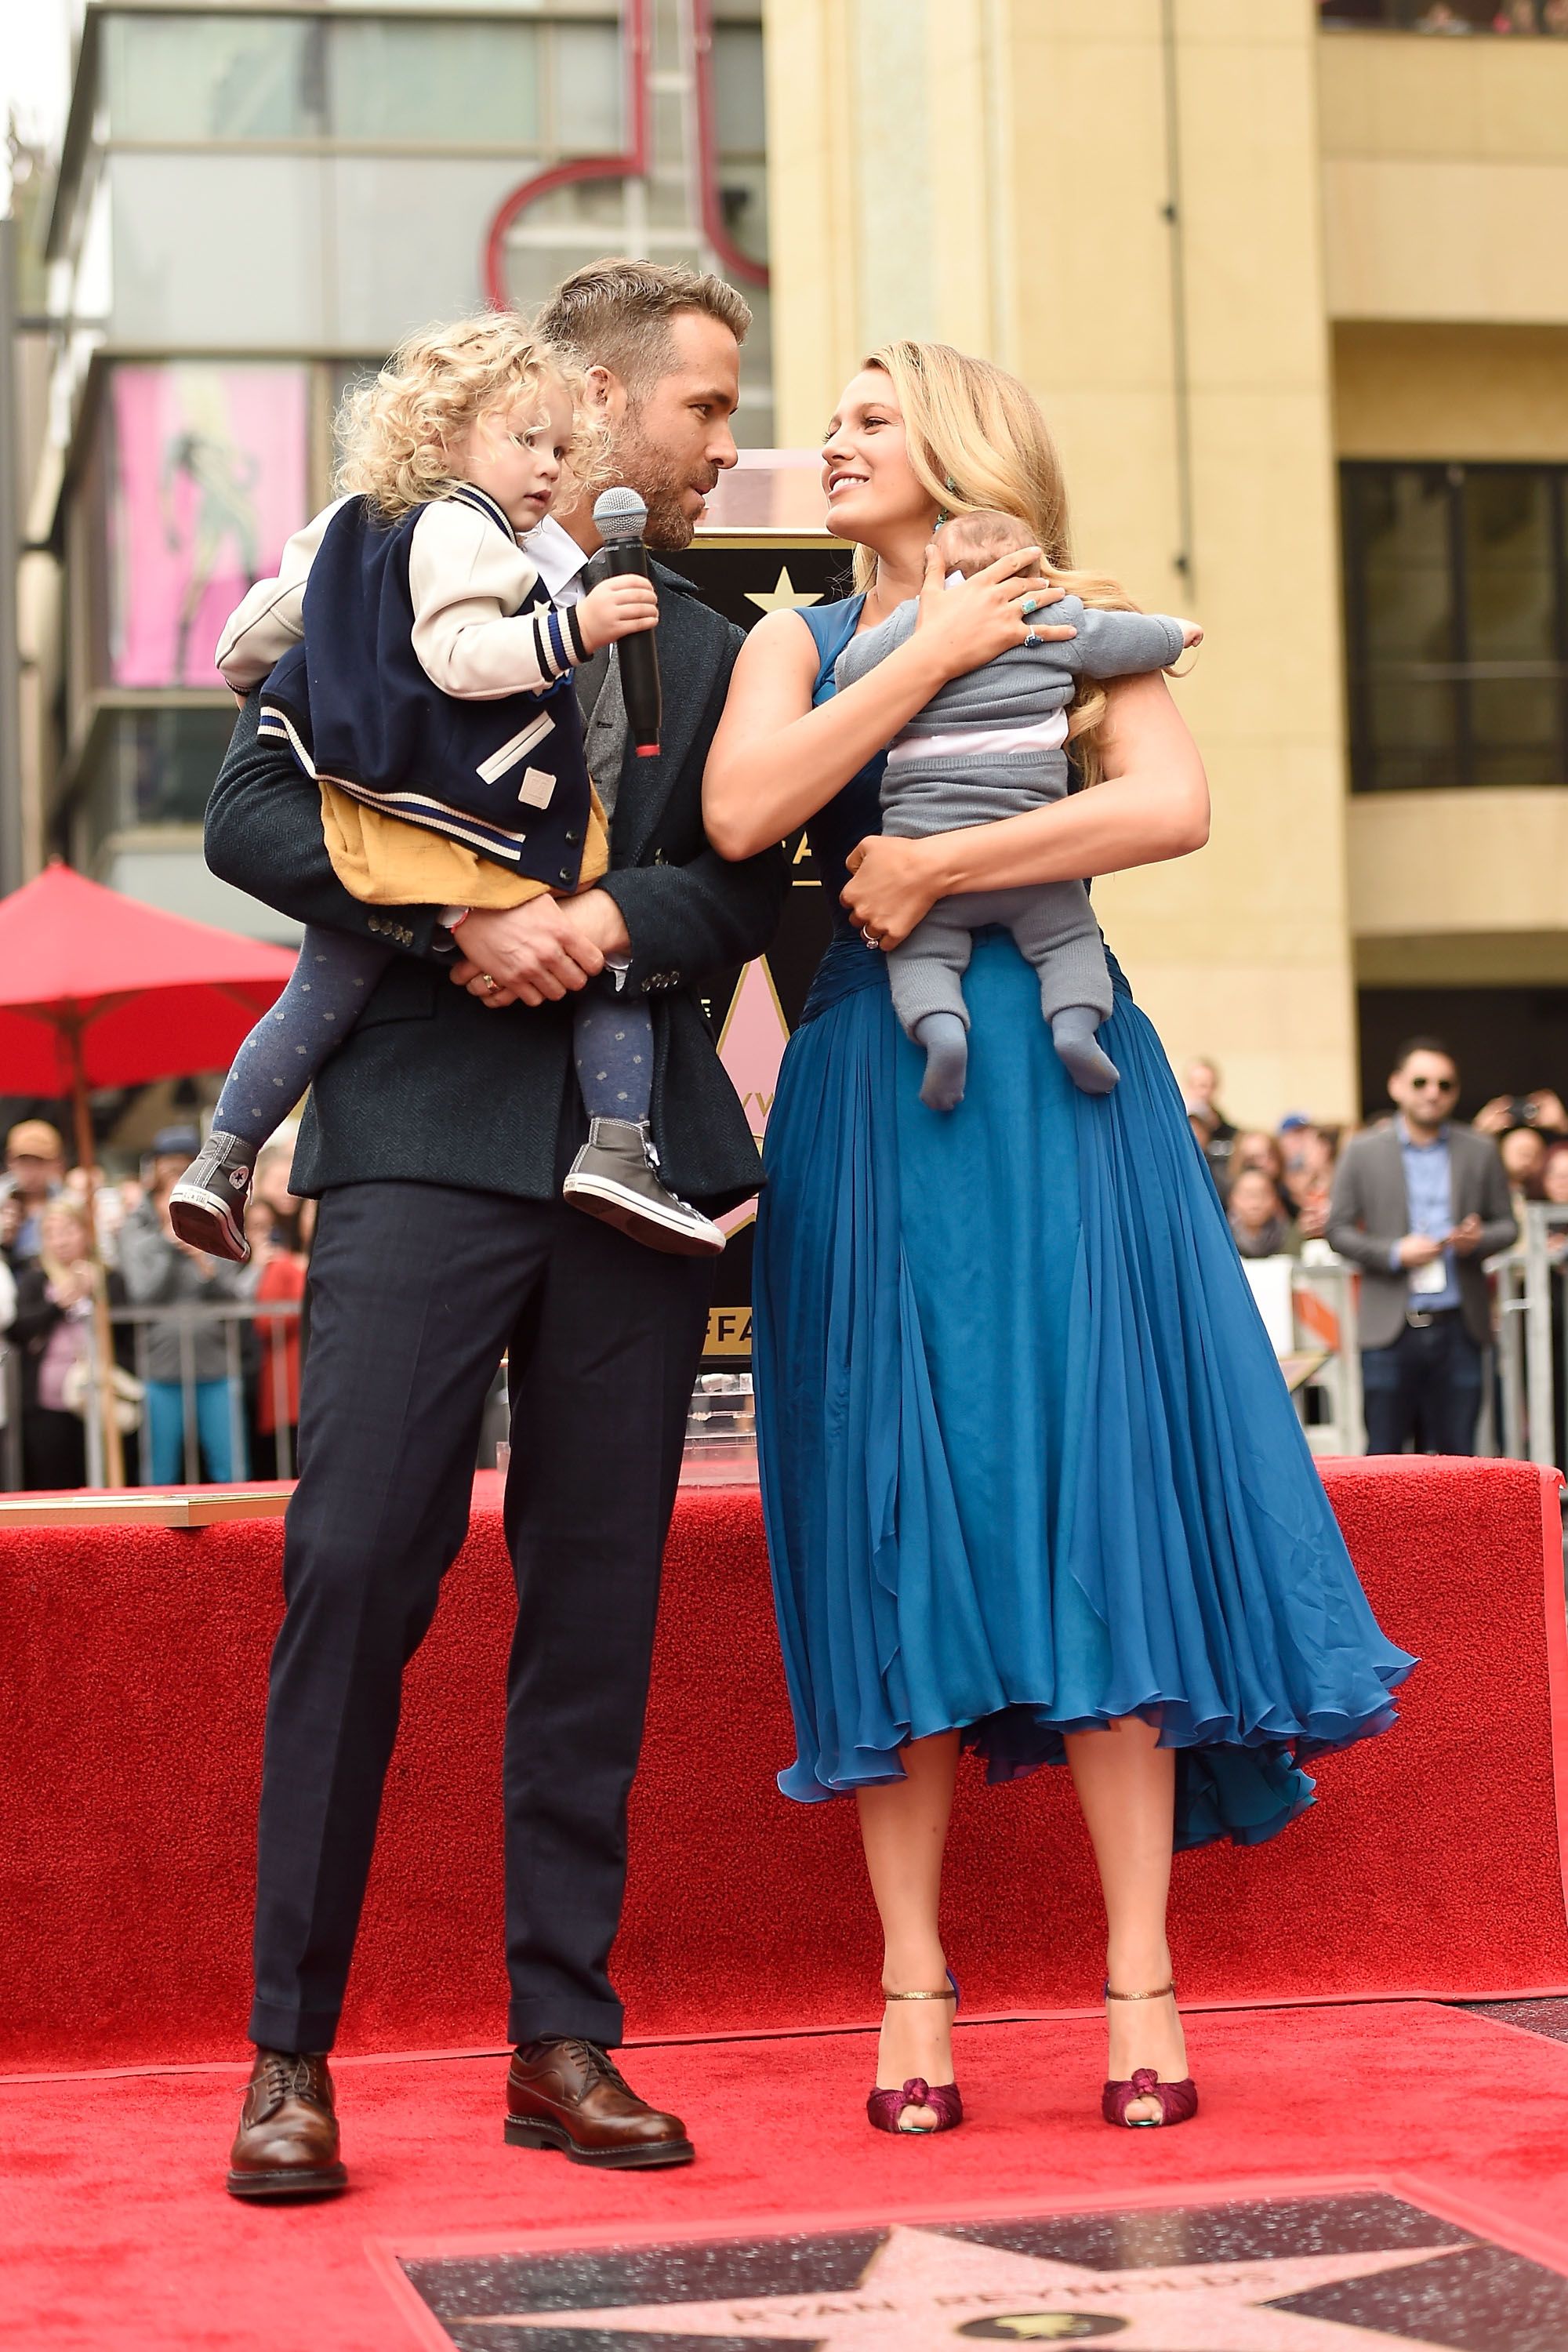 Ryan Reynolds (L) and Blake Lively pose with their daughters as Ryan Reynolds is honored with star on the Hollywood Walk of Fame. | Source: Getty Images